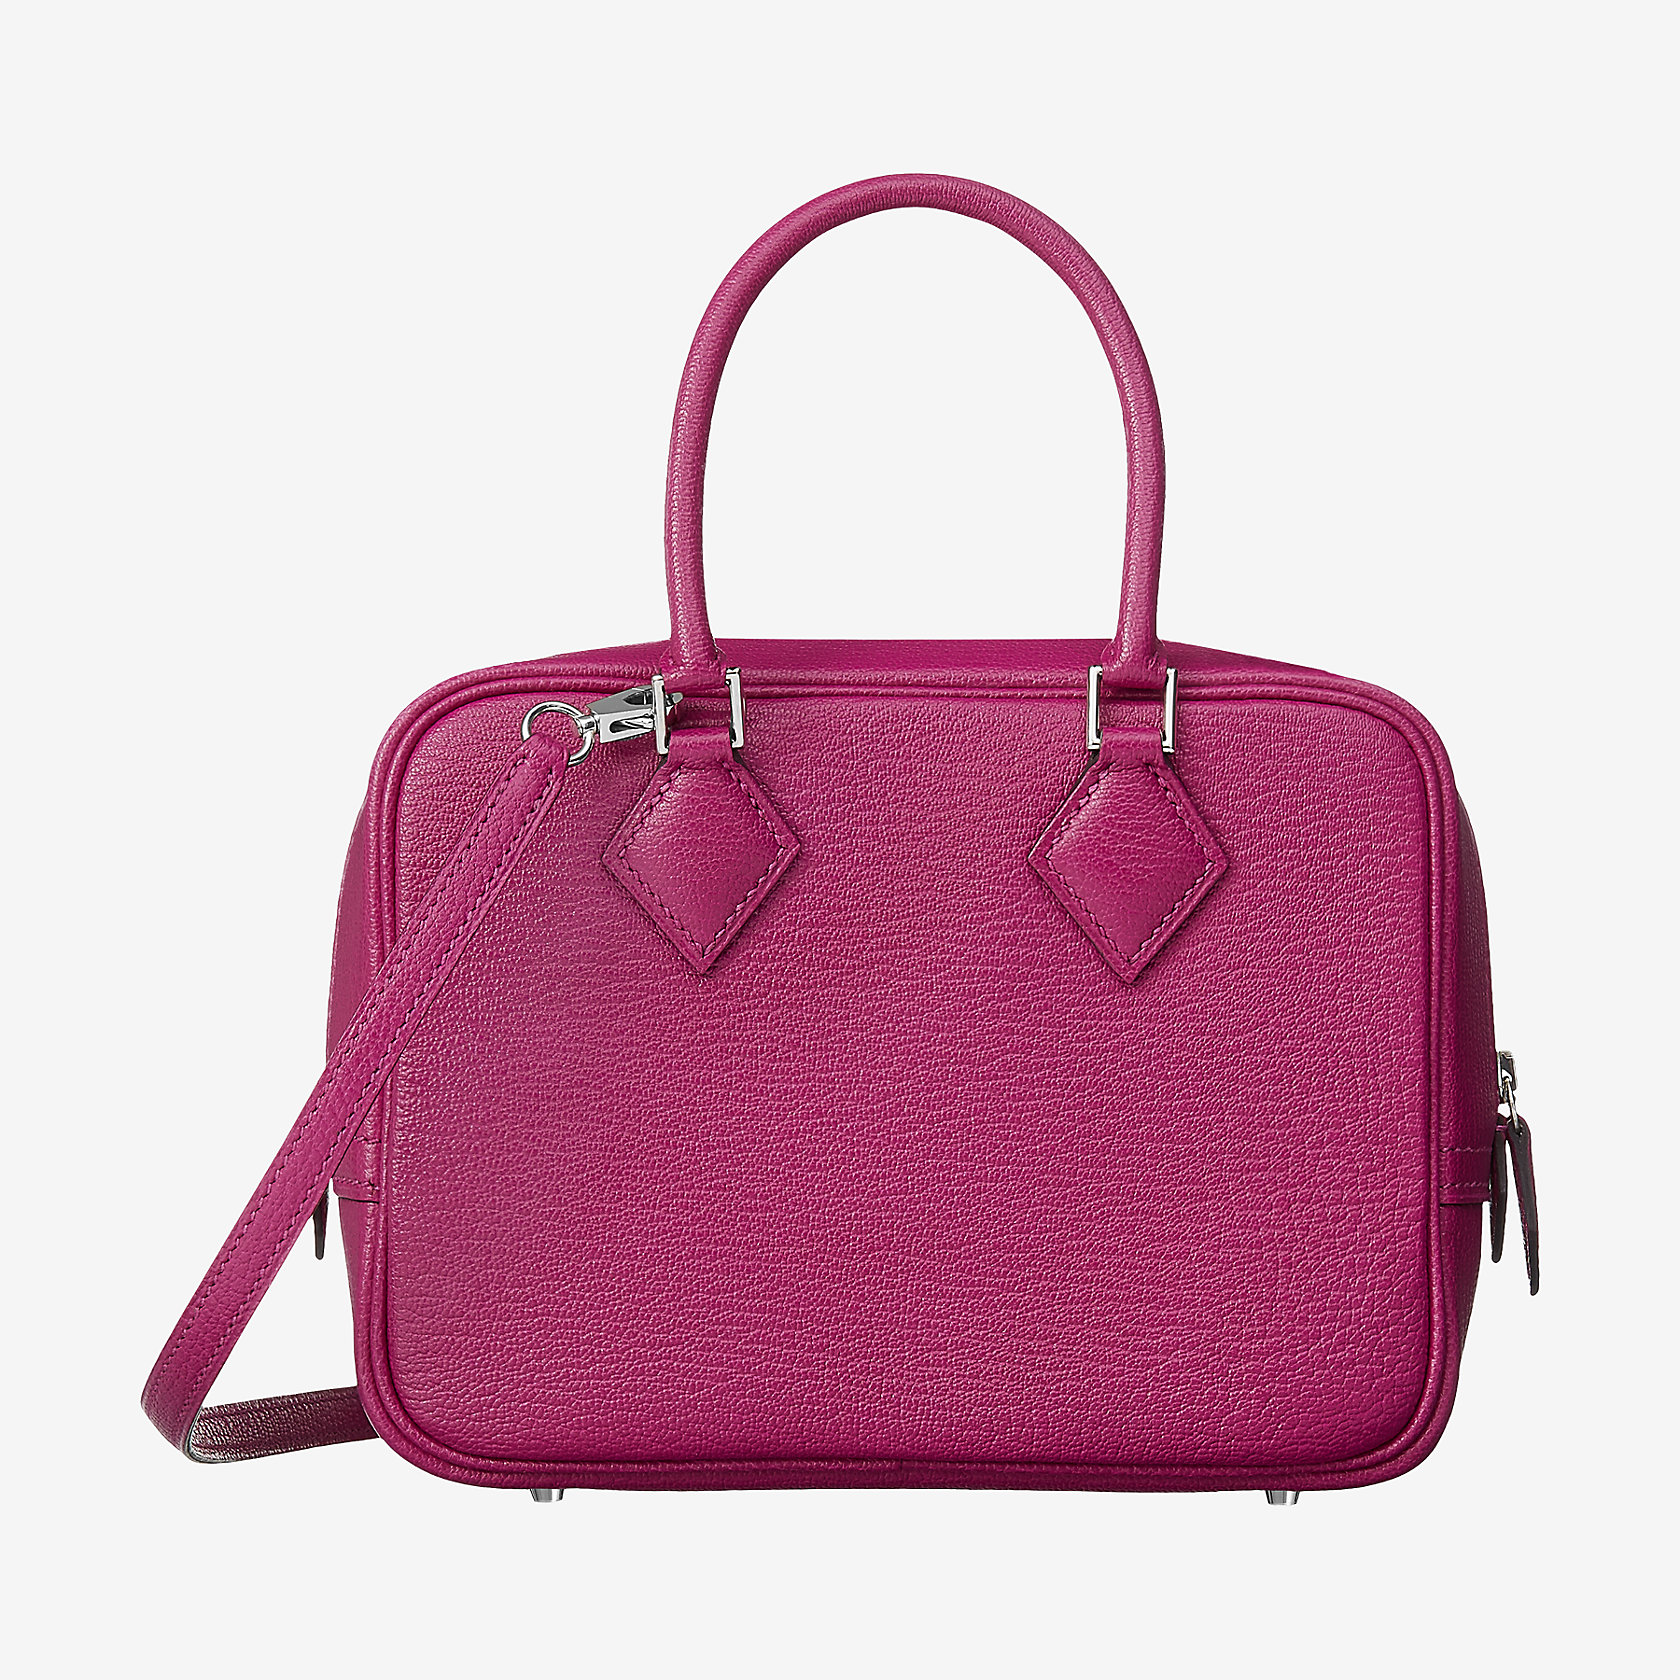 Women's Bags and Clutches | Hermes